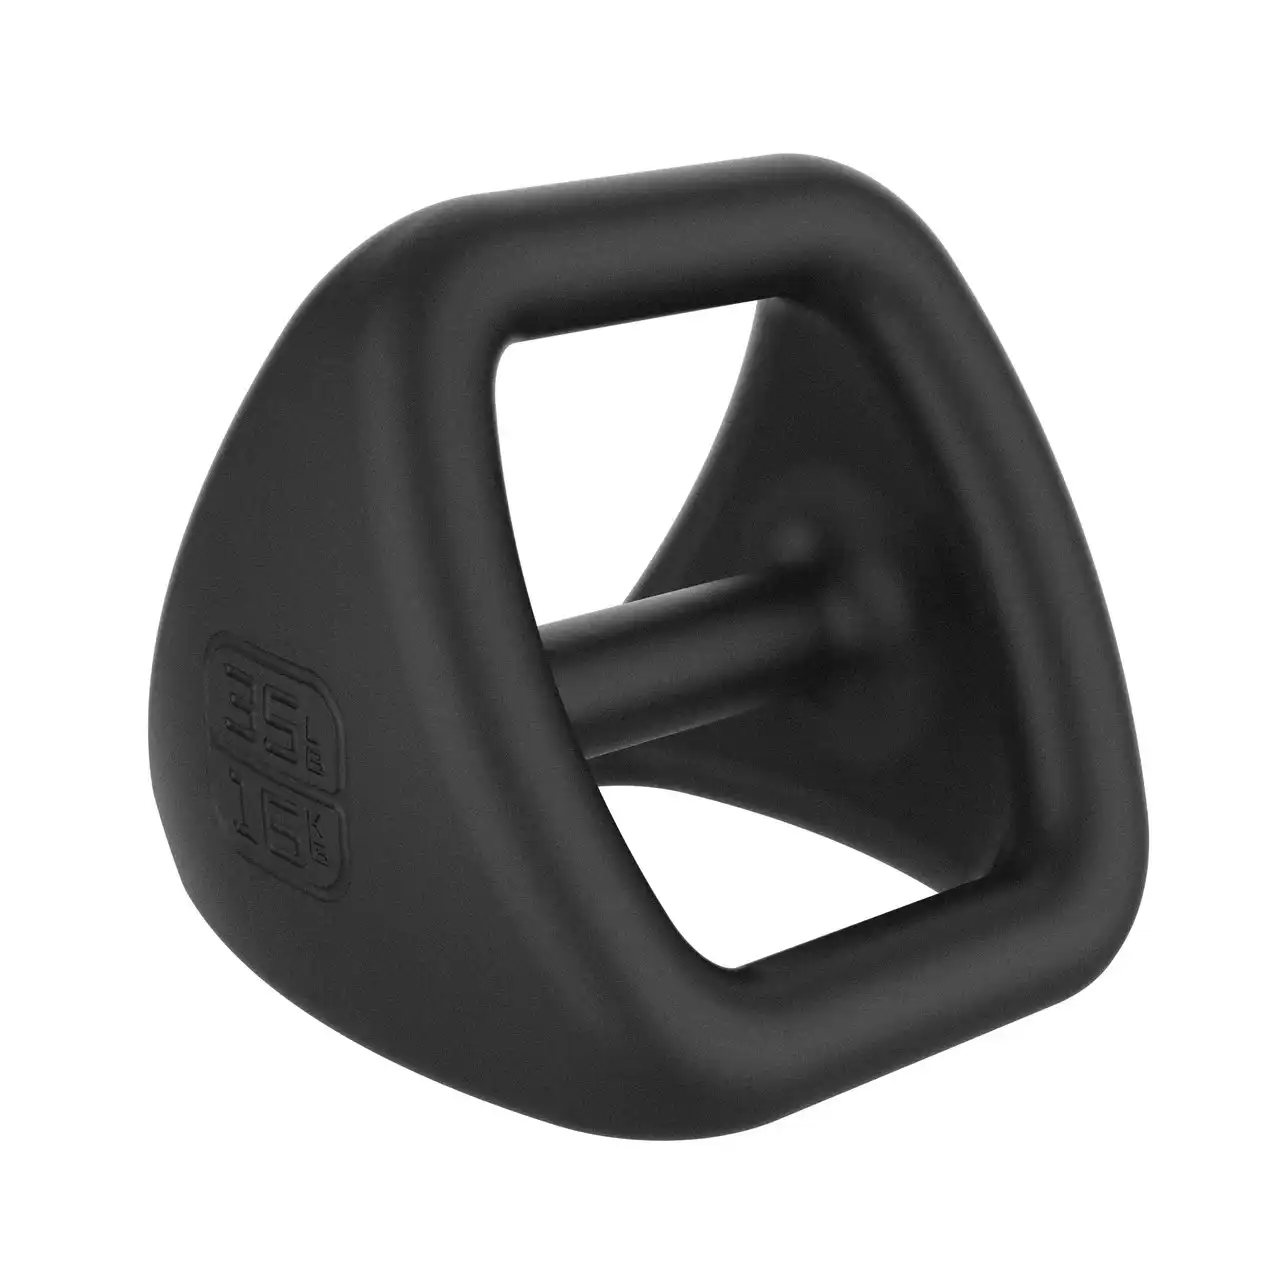 YBell Pro 4-in-1 Kettlebell/Dumbbell/Med Ball/Push Up Stand 16kg Workout Weights